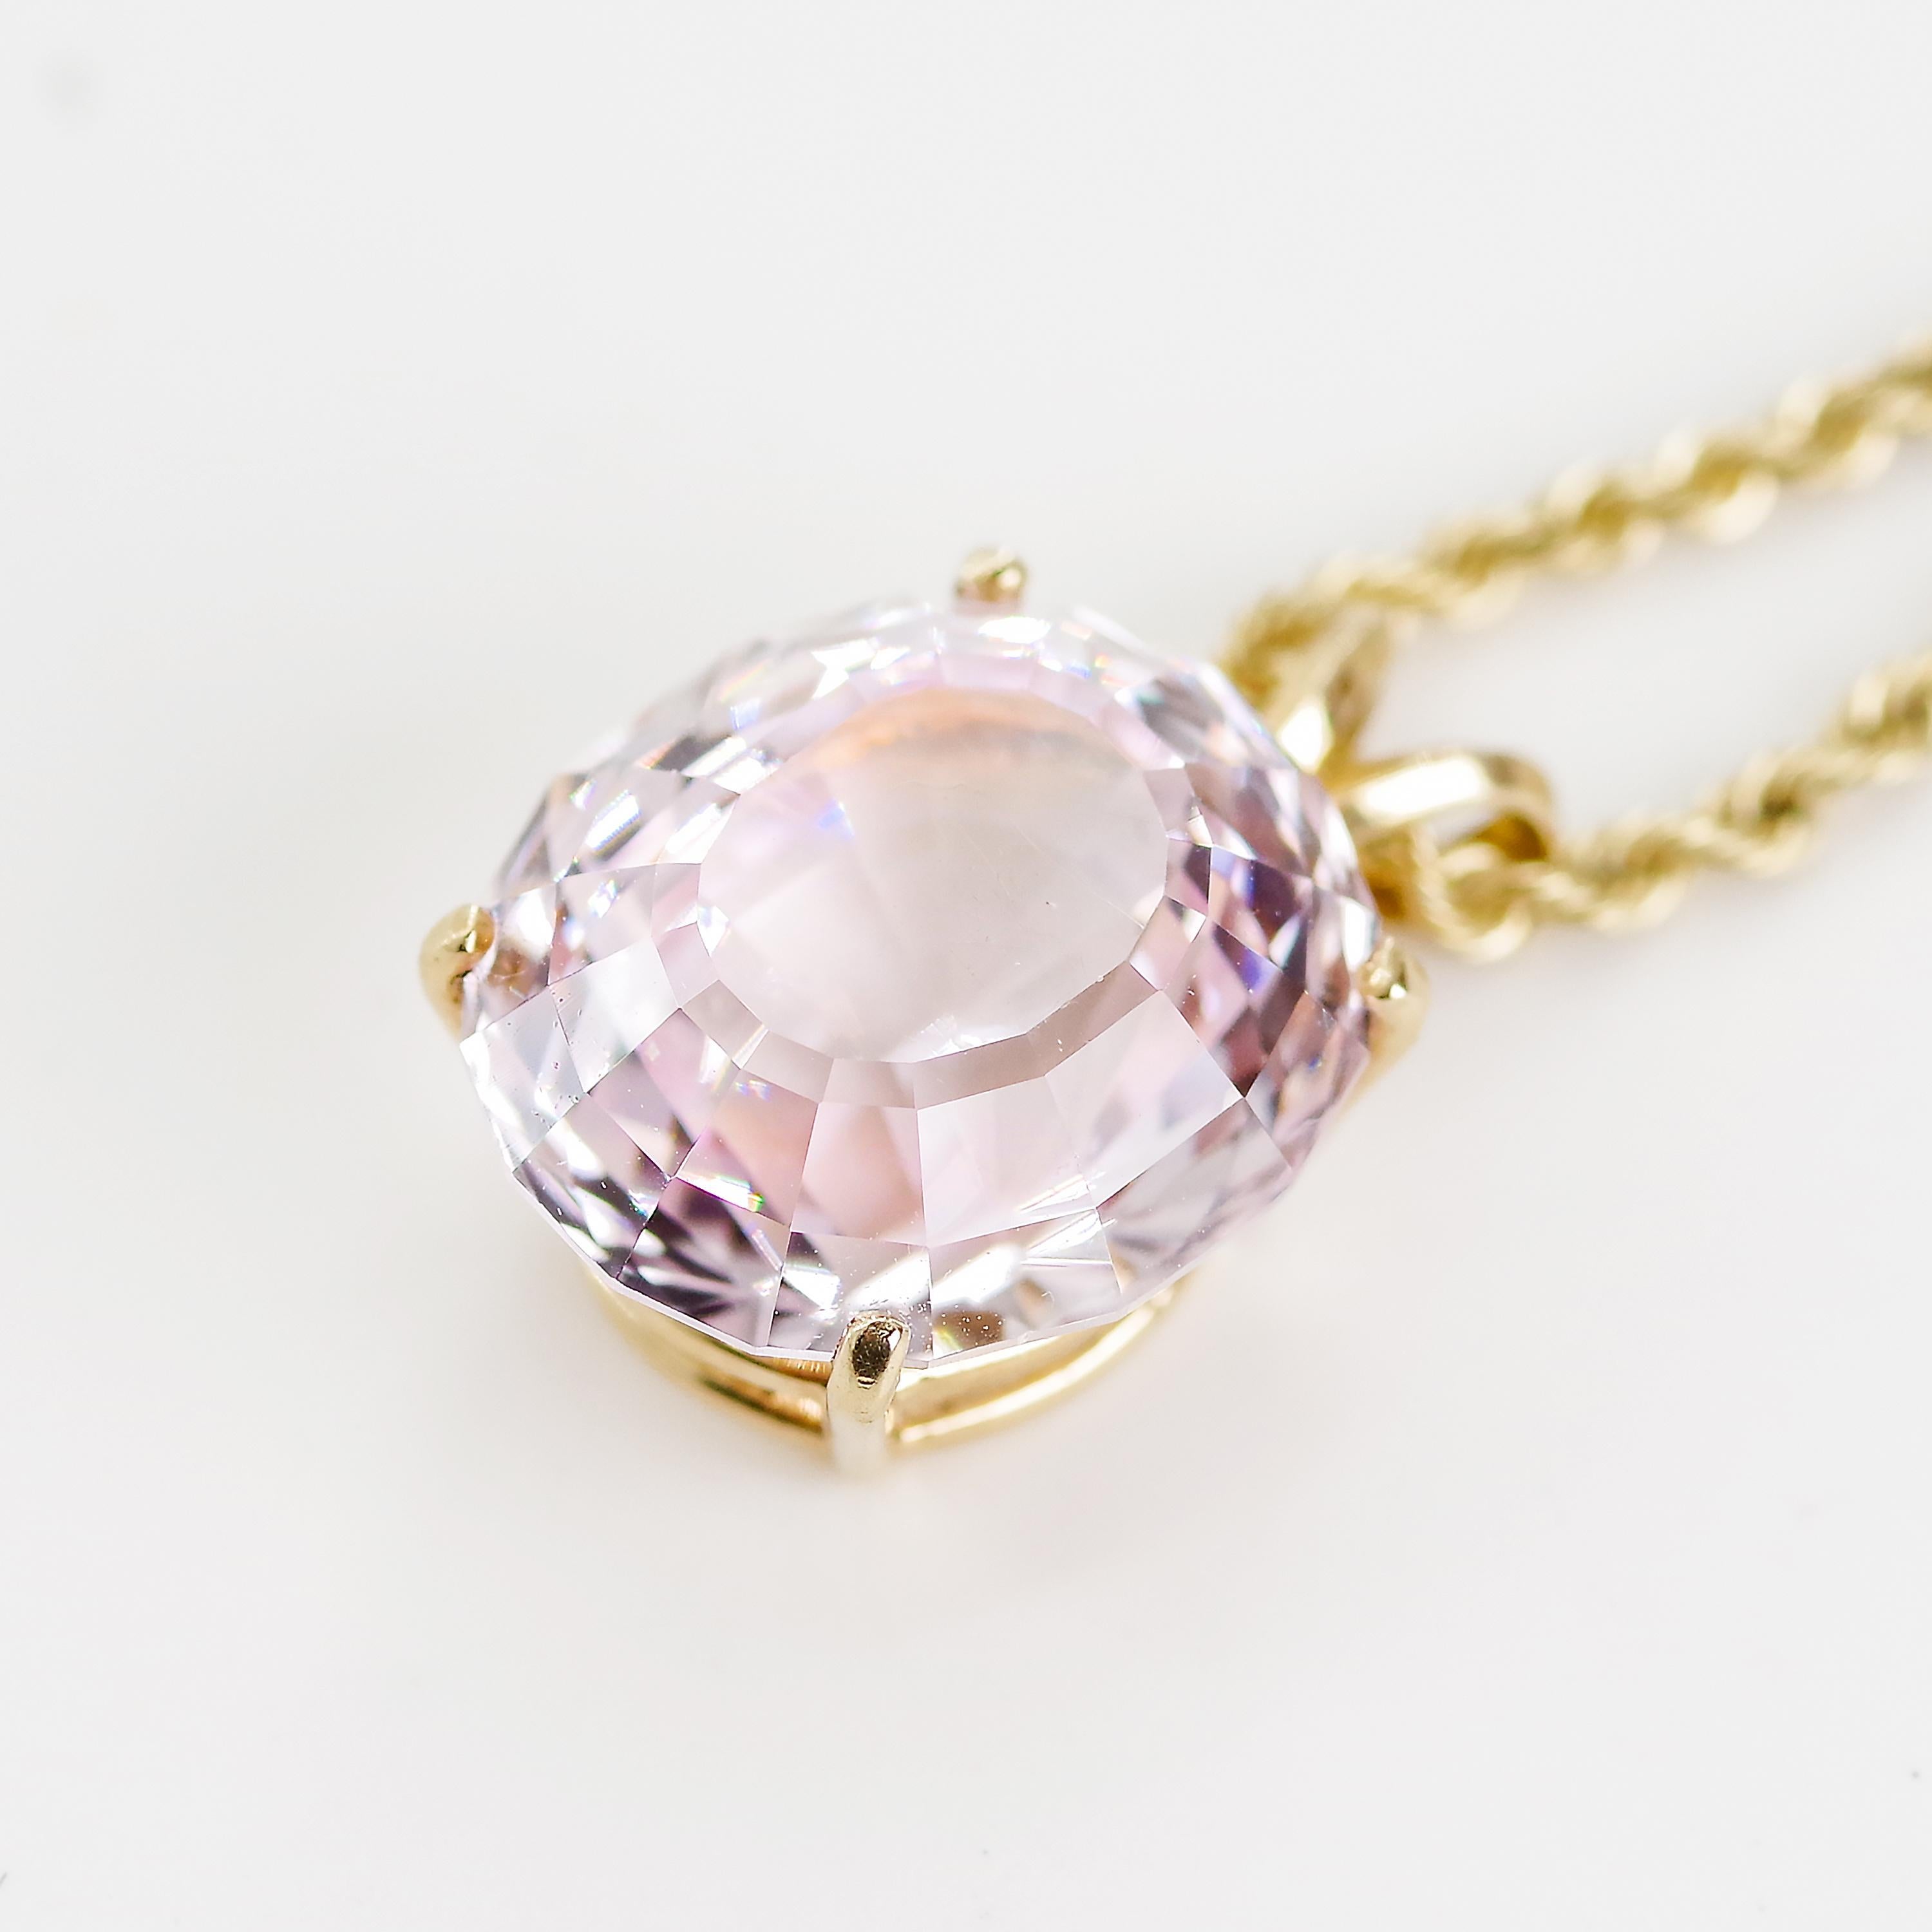 This is 14.5 carats of deep, faceted oval violet-pink Morganite. Do we all know the story of Morganite? In case we don't, here goes: Morganite is the same mineral as emerald and aquamarine -beryl- but when it comes in pink to orange-pink it’s called